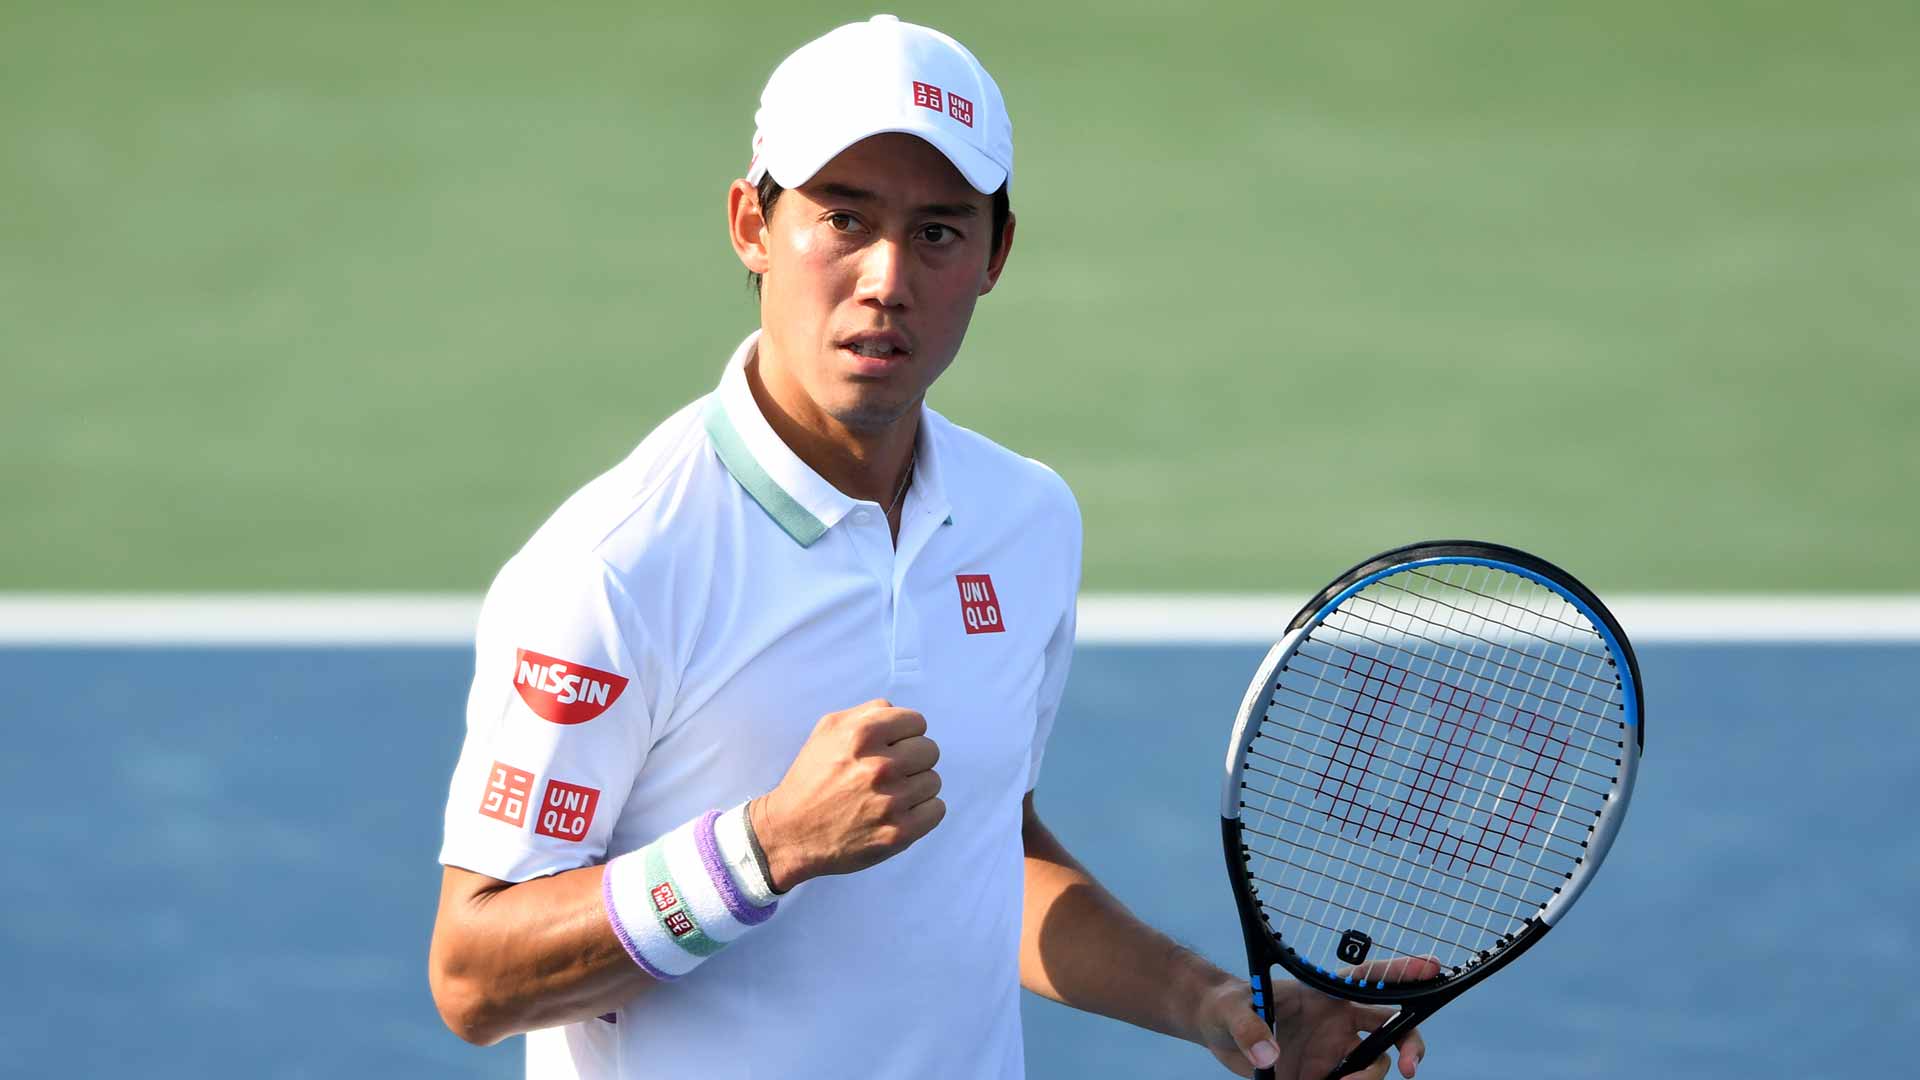 Kei Nishikori is playing his first tournament since October 2021.